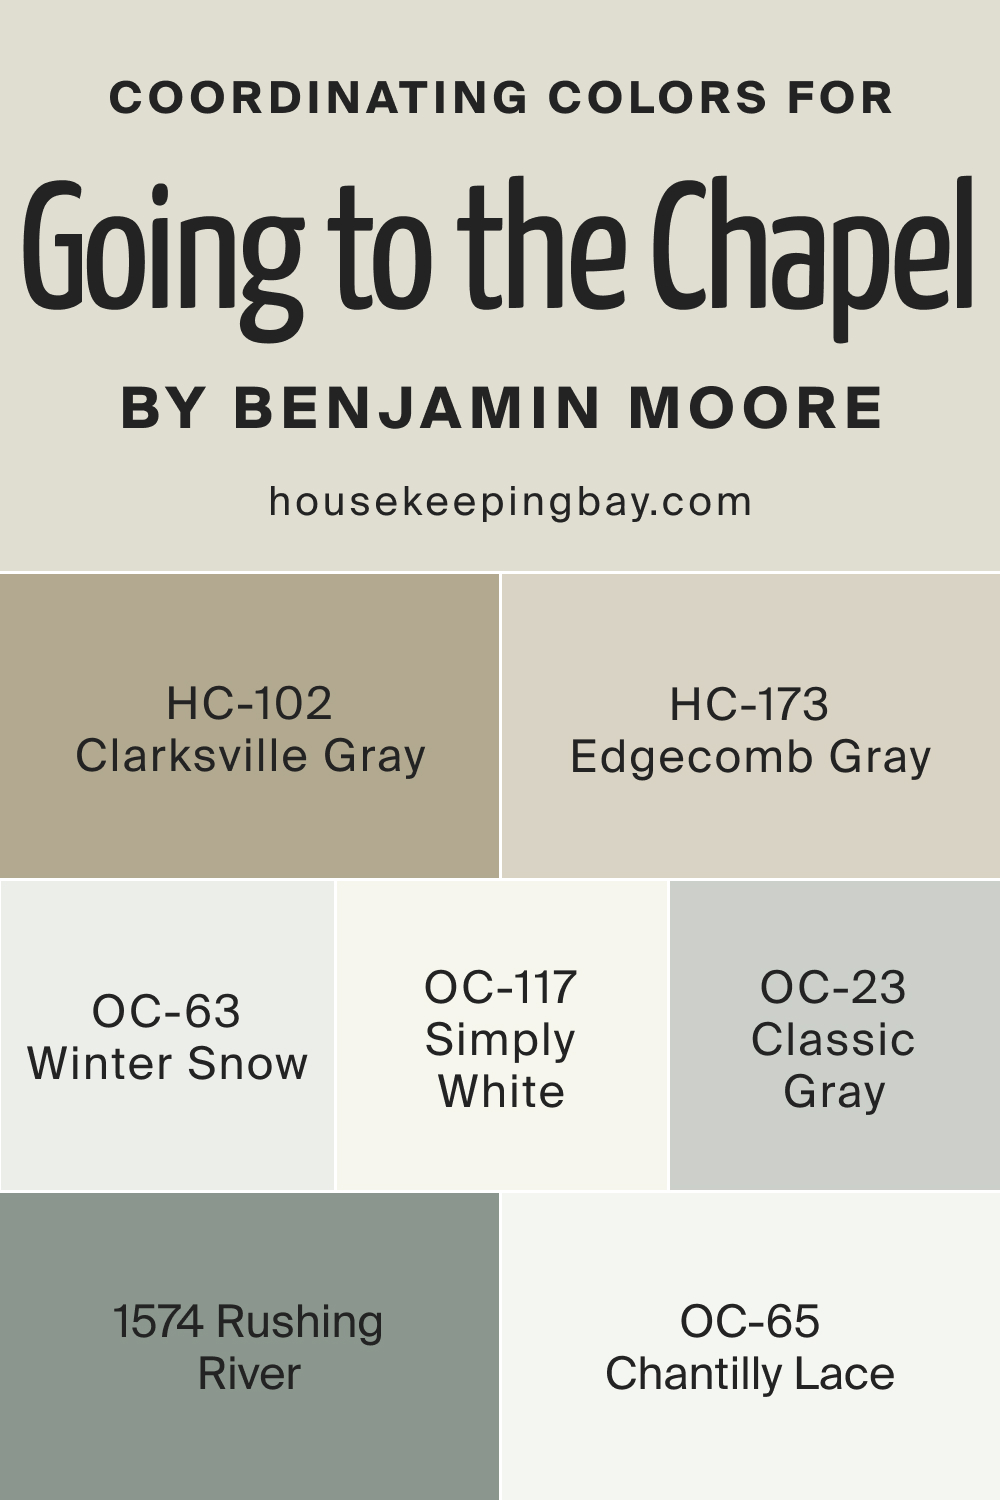 Coordinating Colors of BM Going to the Chapel 1527